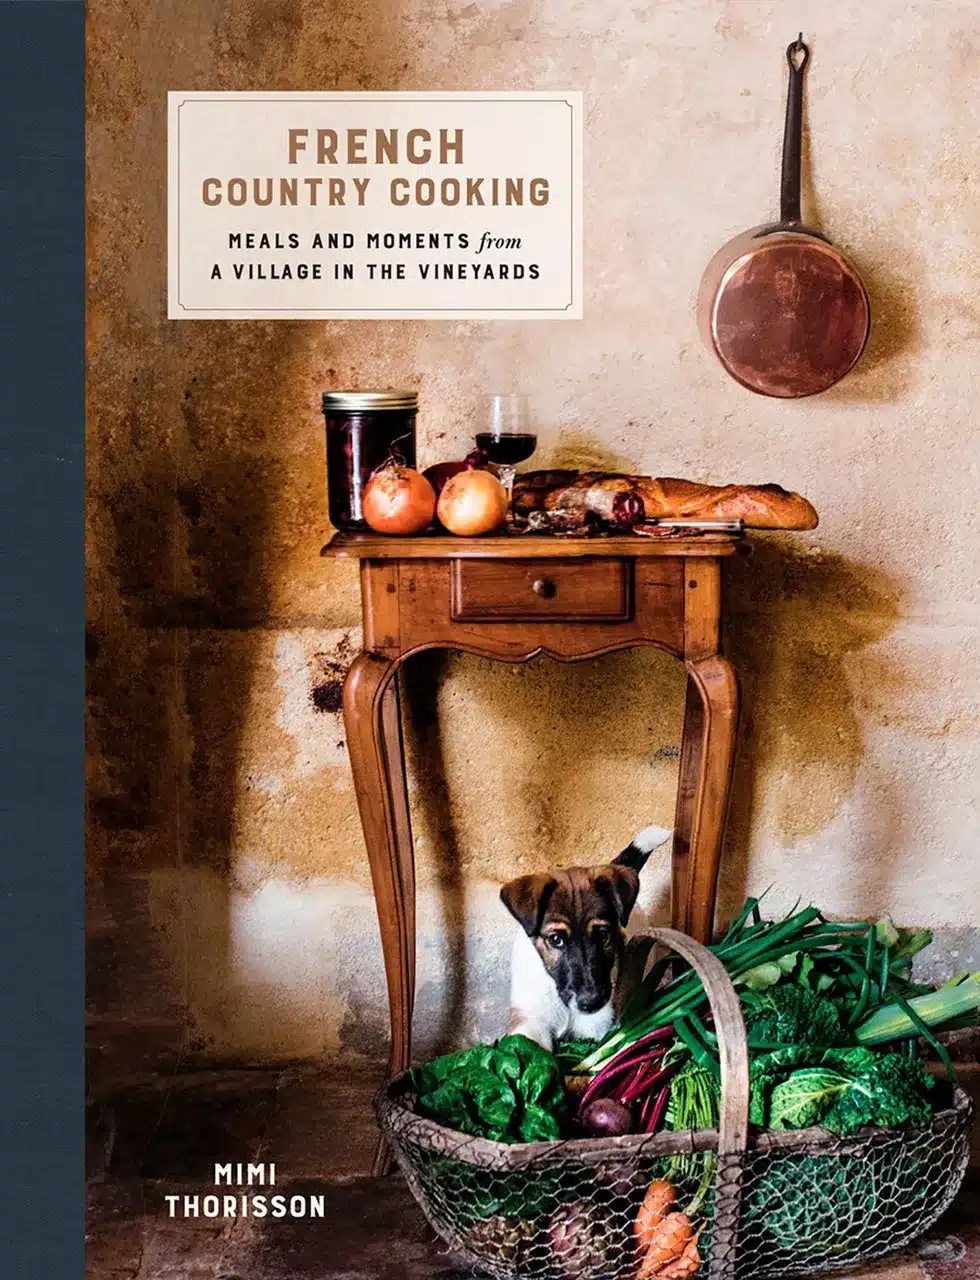 French country cooking by mimi thorrison is katharine pooleys favourite cook book